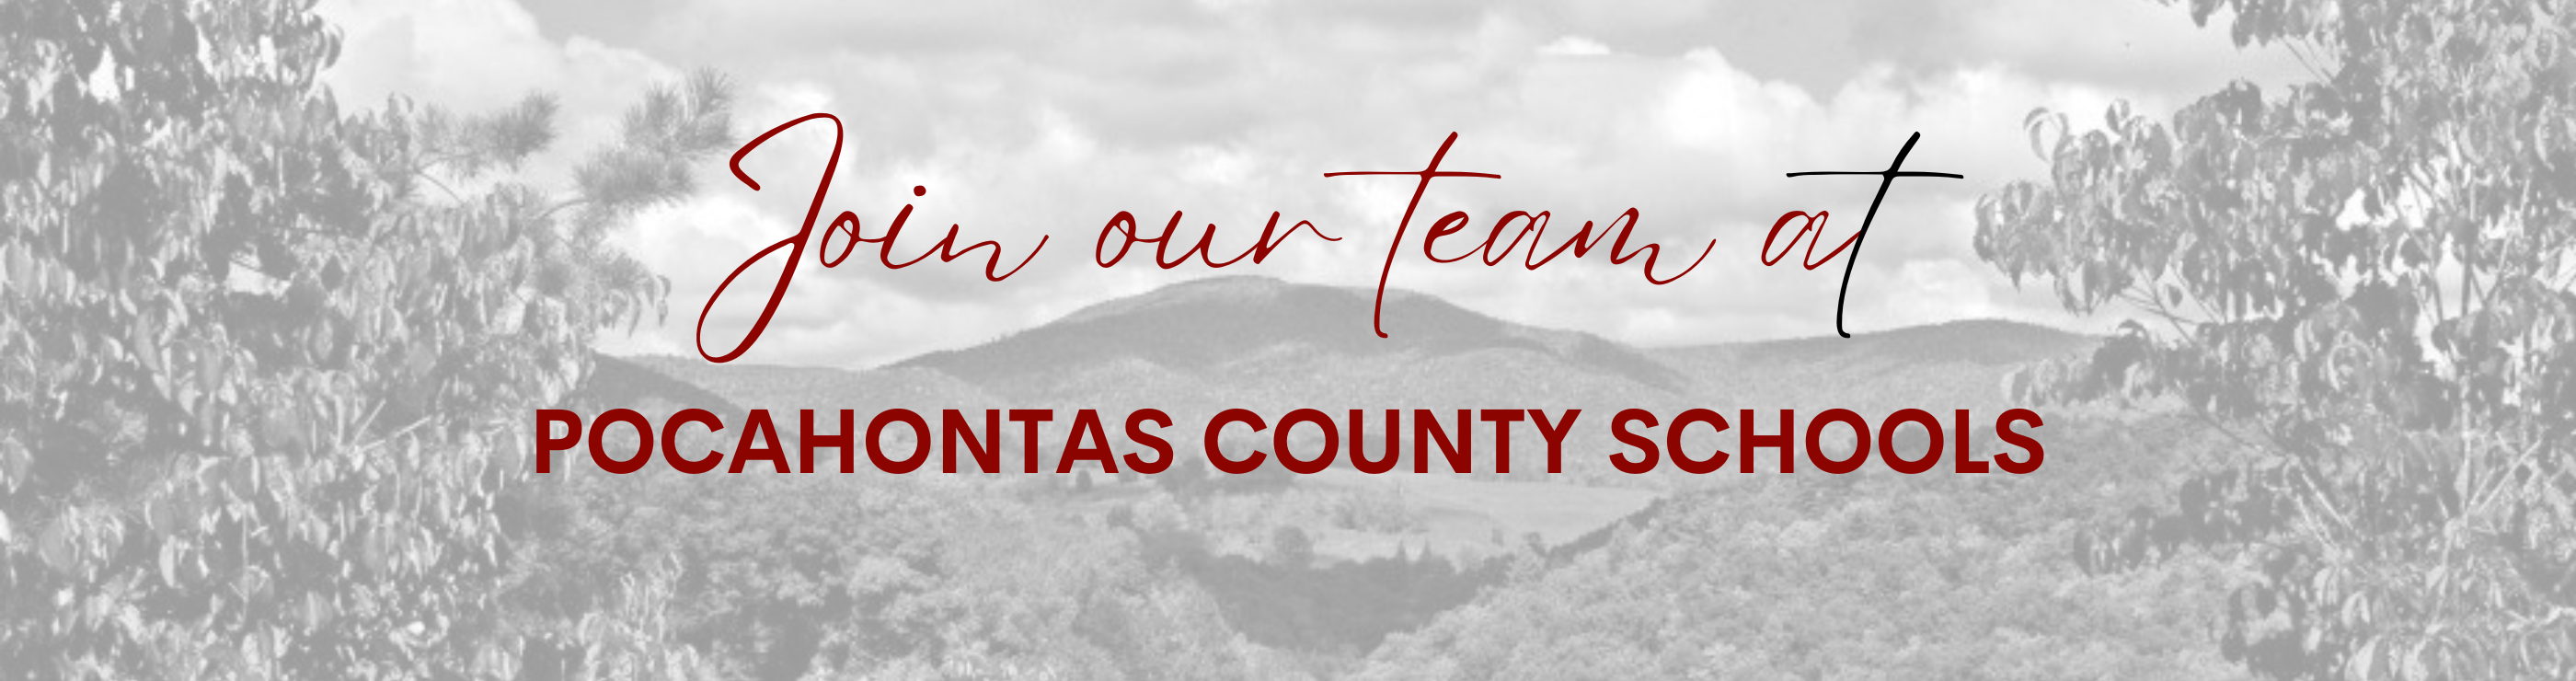 Join our team at Pocahontas County Schools